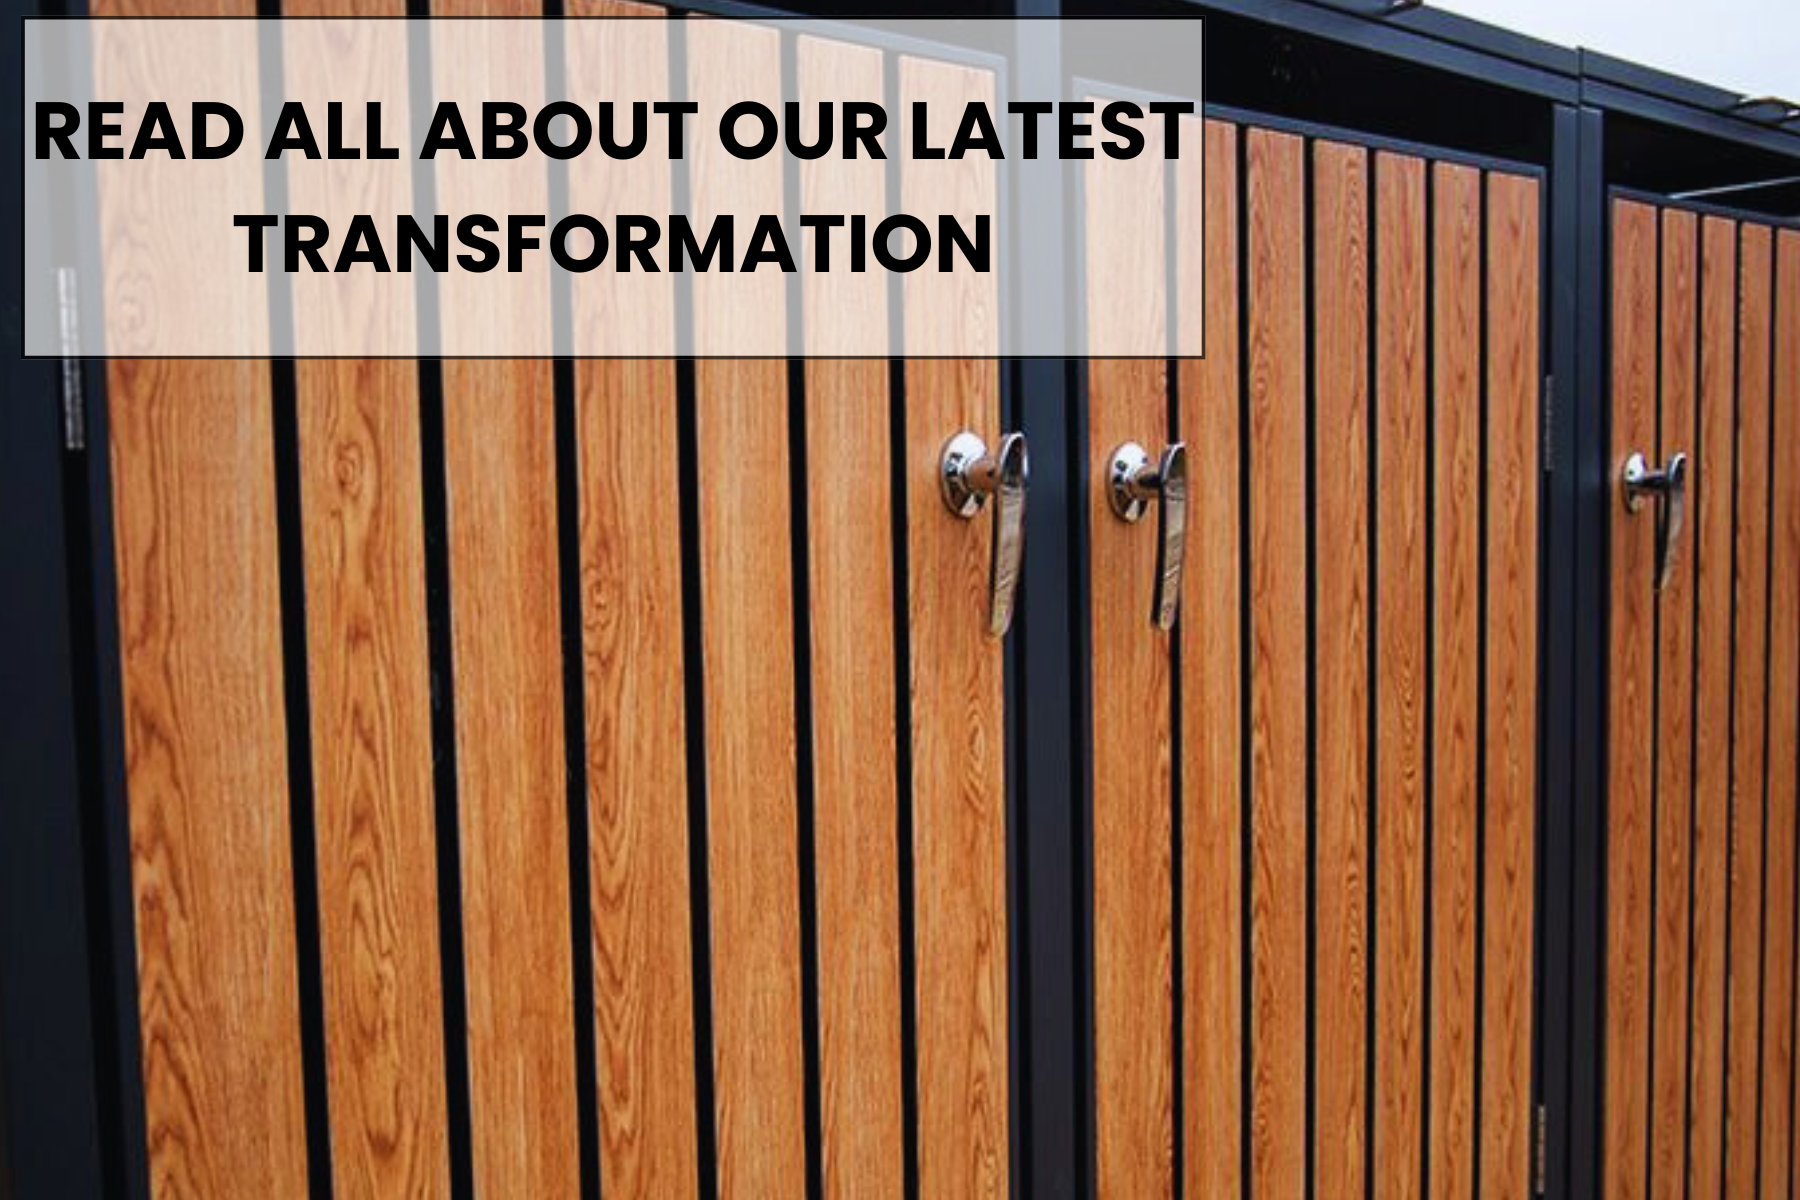 Read all about our latest outdoor transformation!